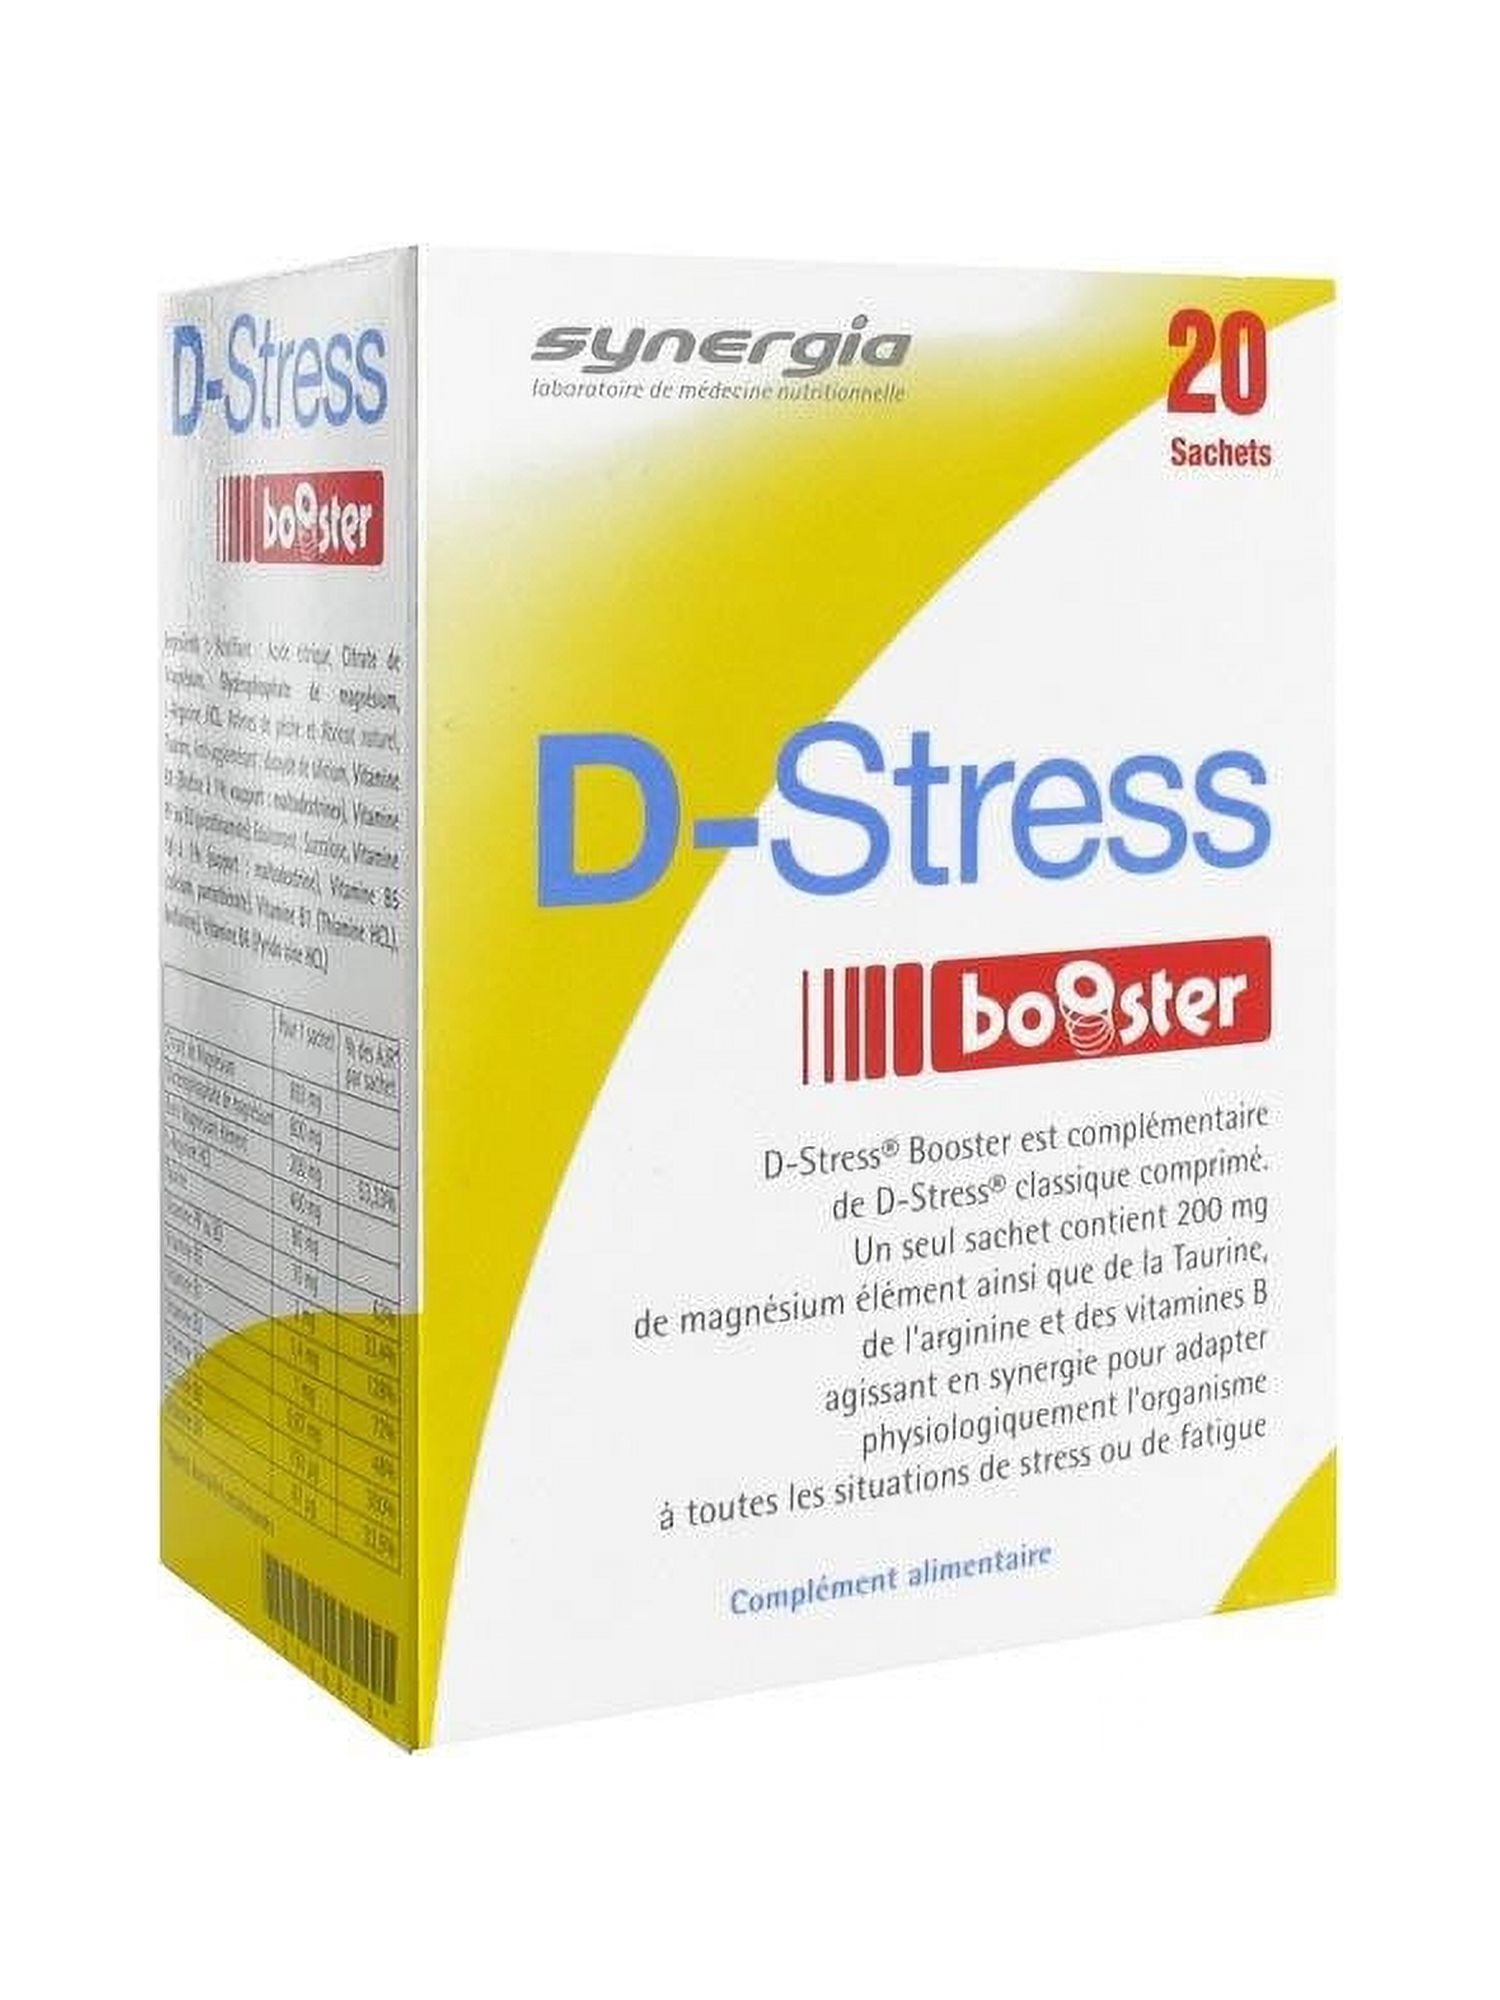 D-stress booster - 20 sachets - Synergia 